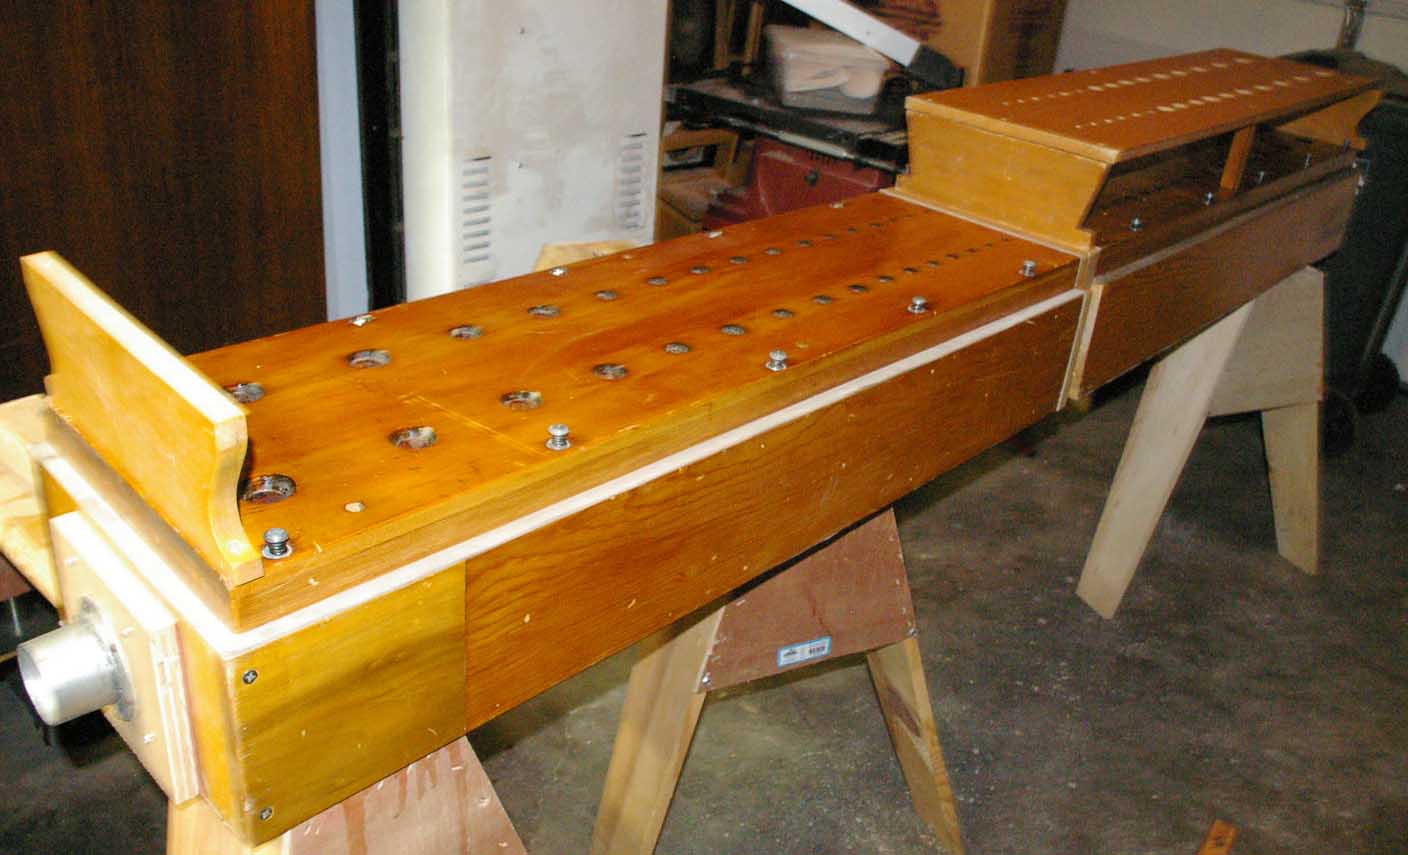 Oboe Horn chest rejoined to one chest